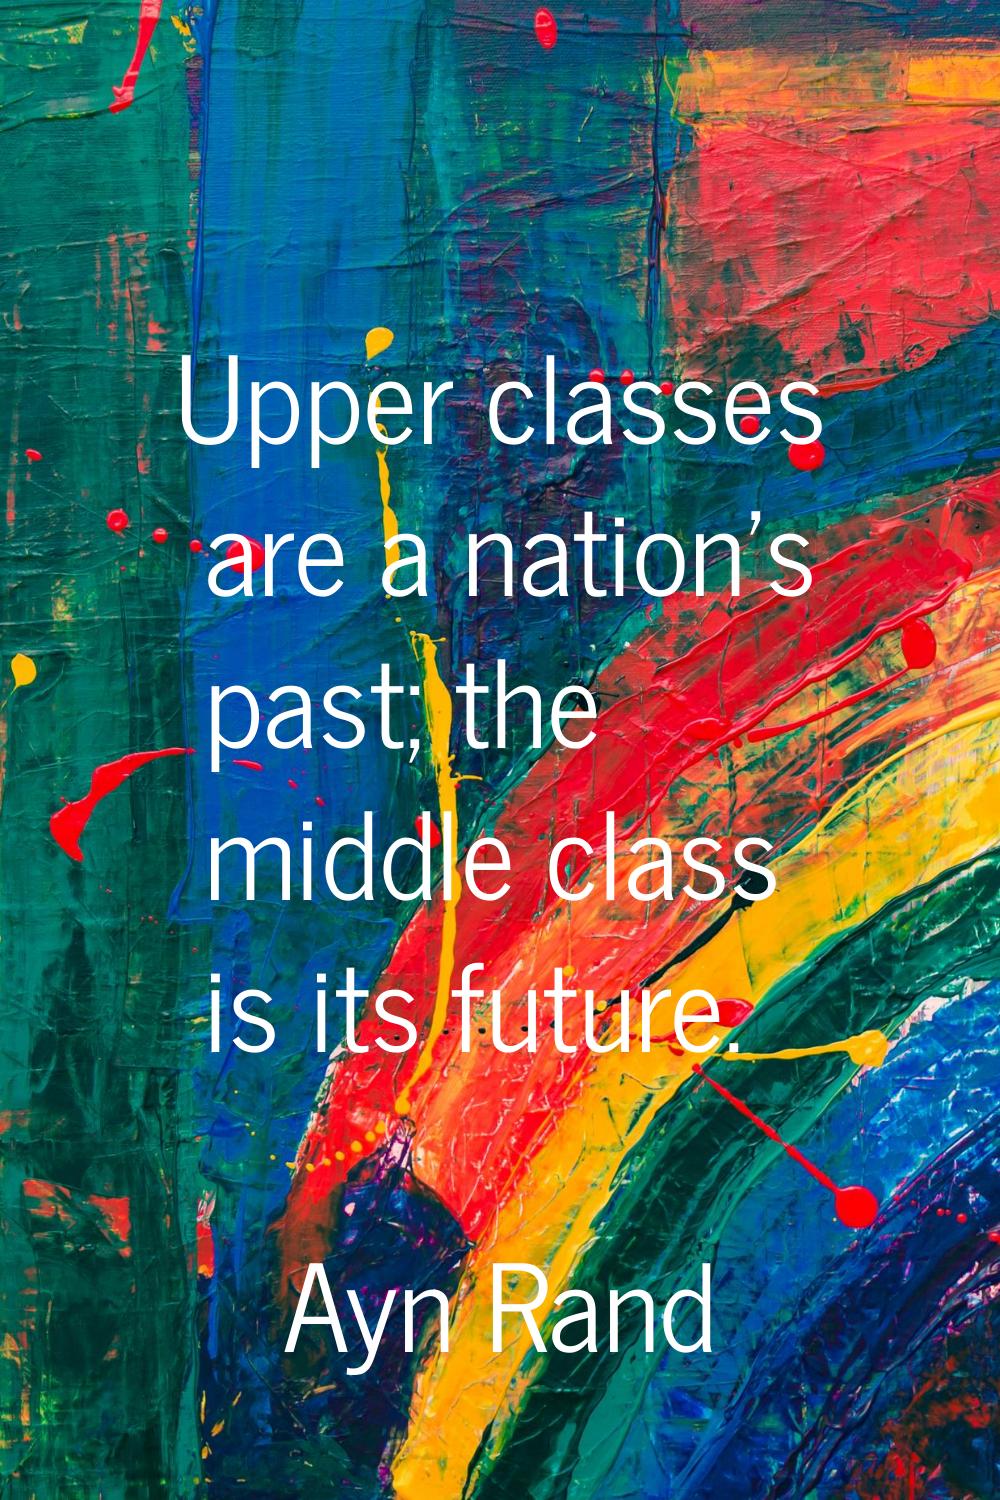 Upper classes are a nation's past; the middle class is its future.